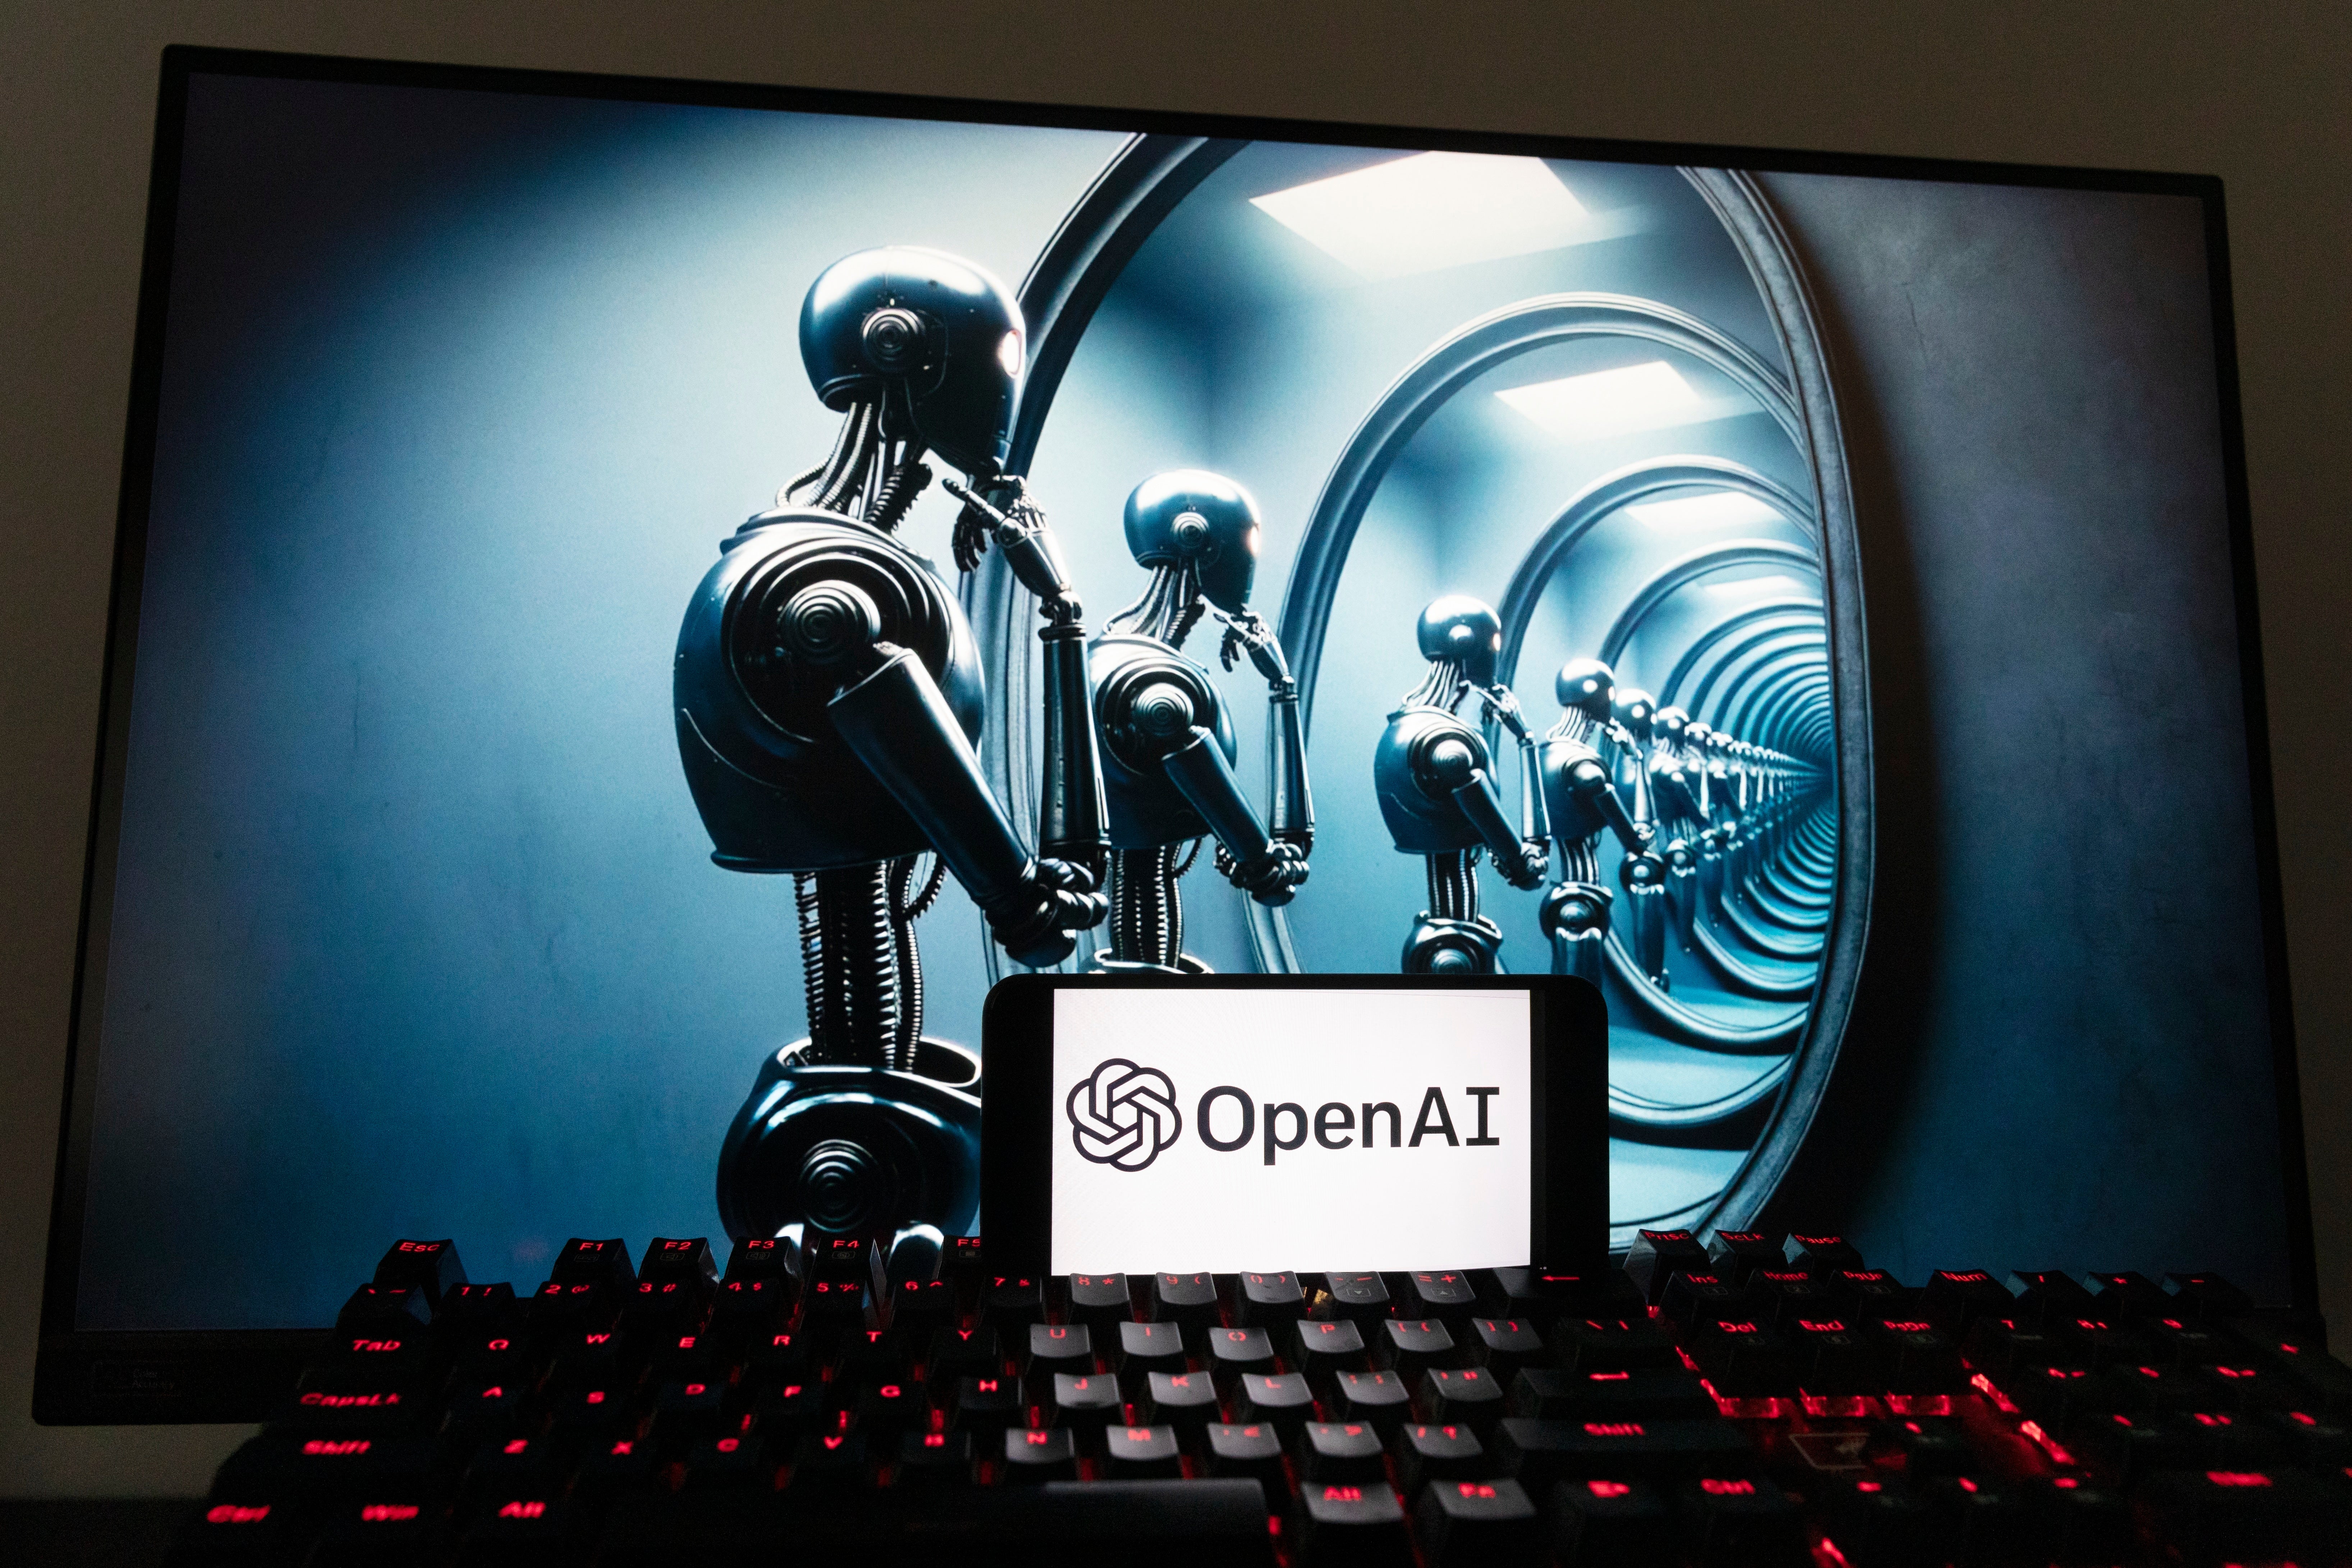 The OpenAI logo is seen displayed on a cell phone with an image on a computer screen generated by ChatGPT's Dall-E text-to-image model